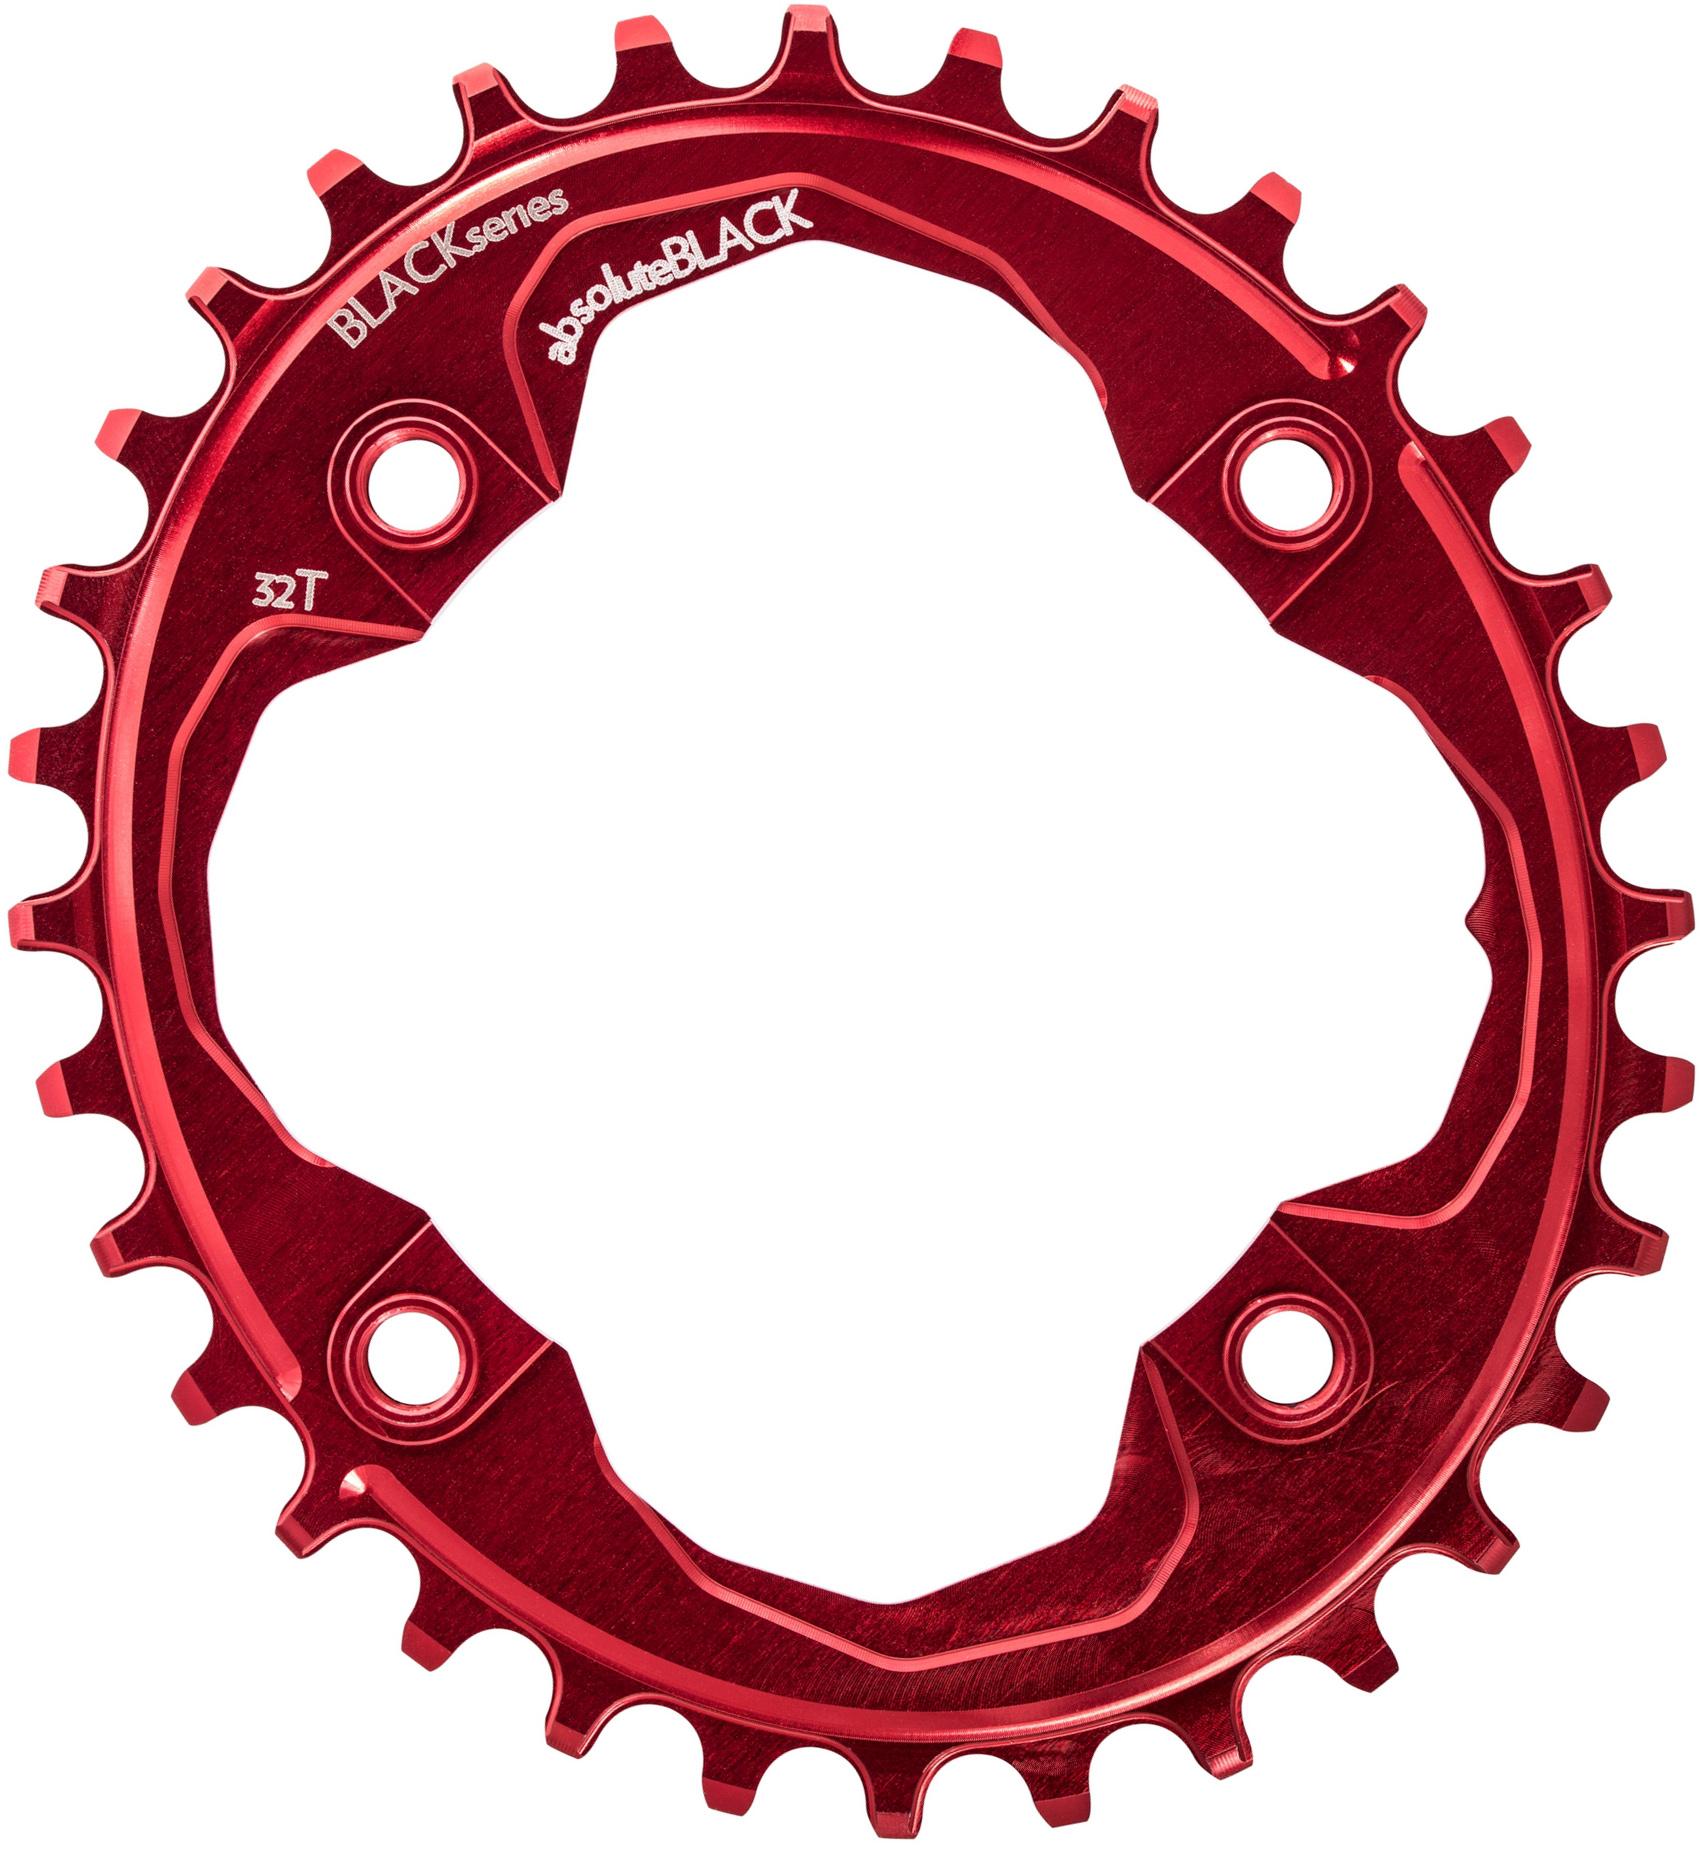 Black By Absolutebla Narrow Wide Oval Chainring - Red